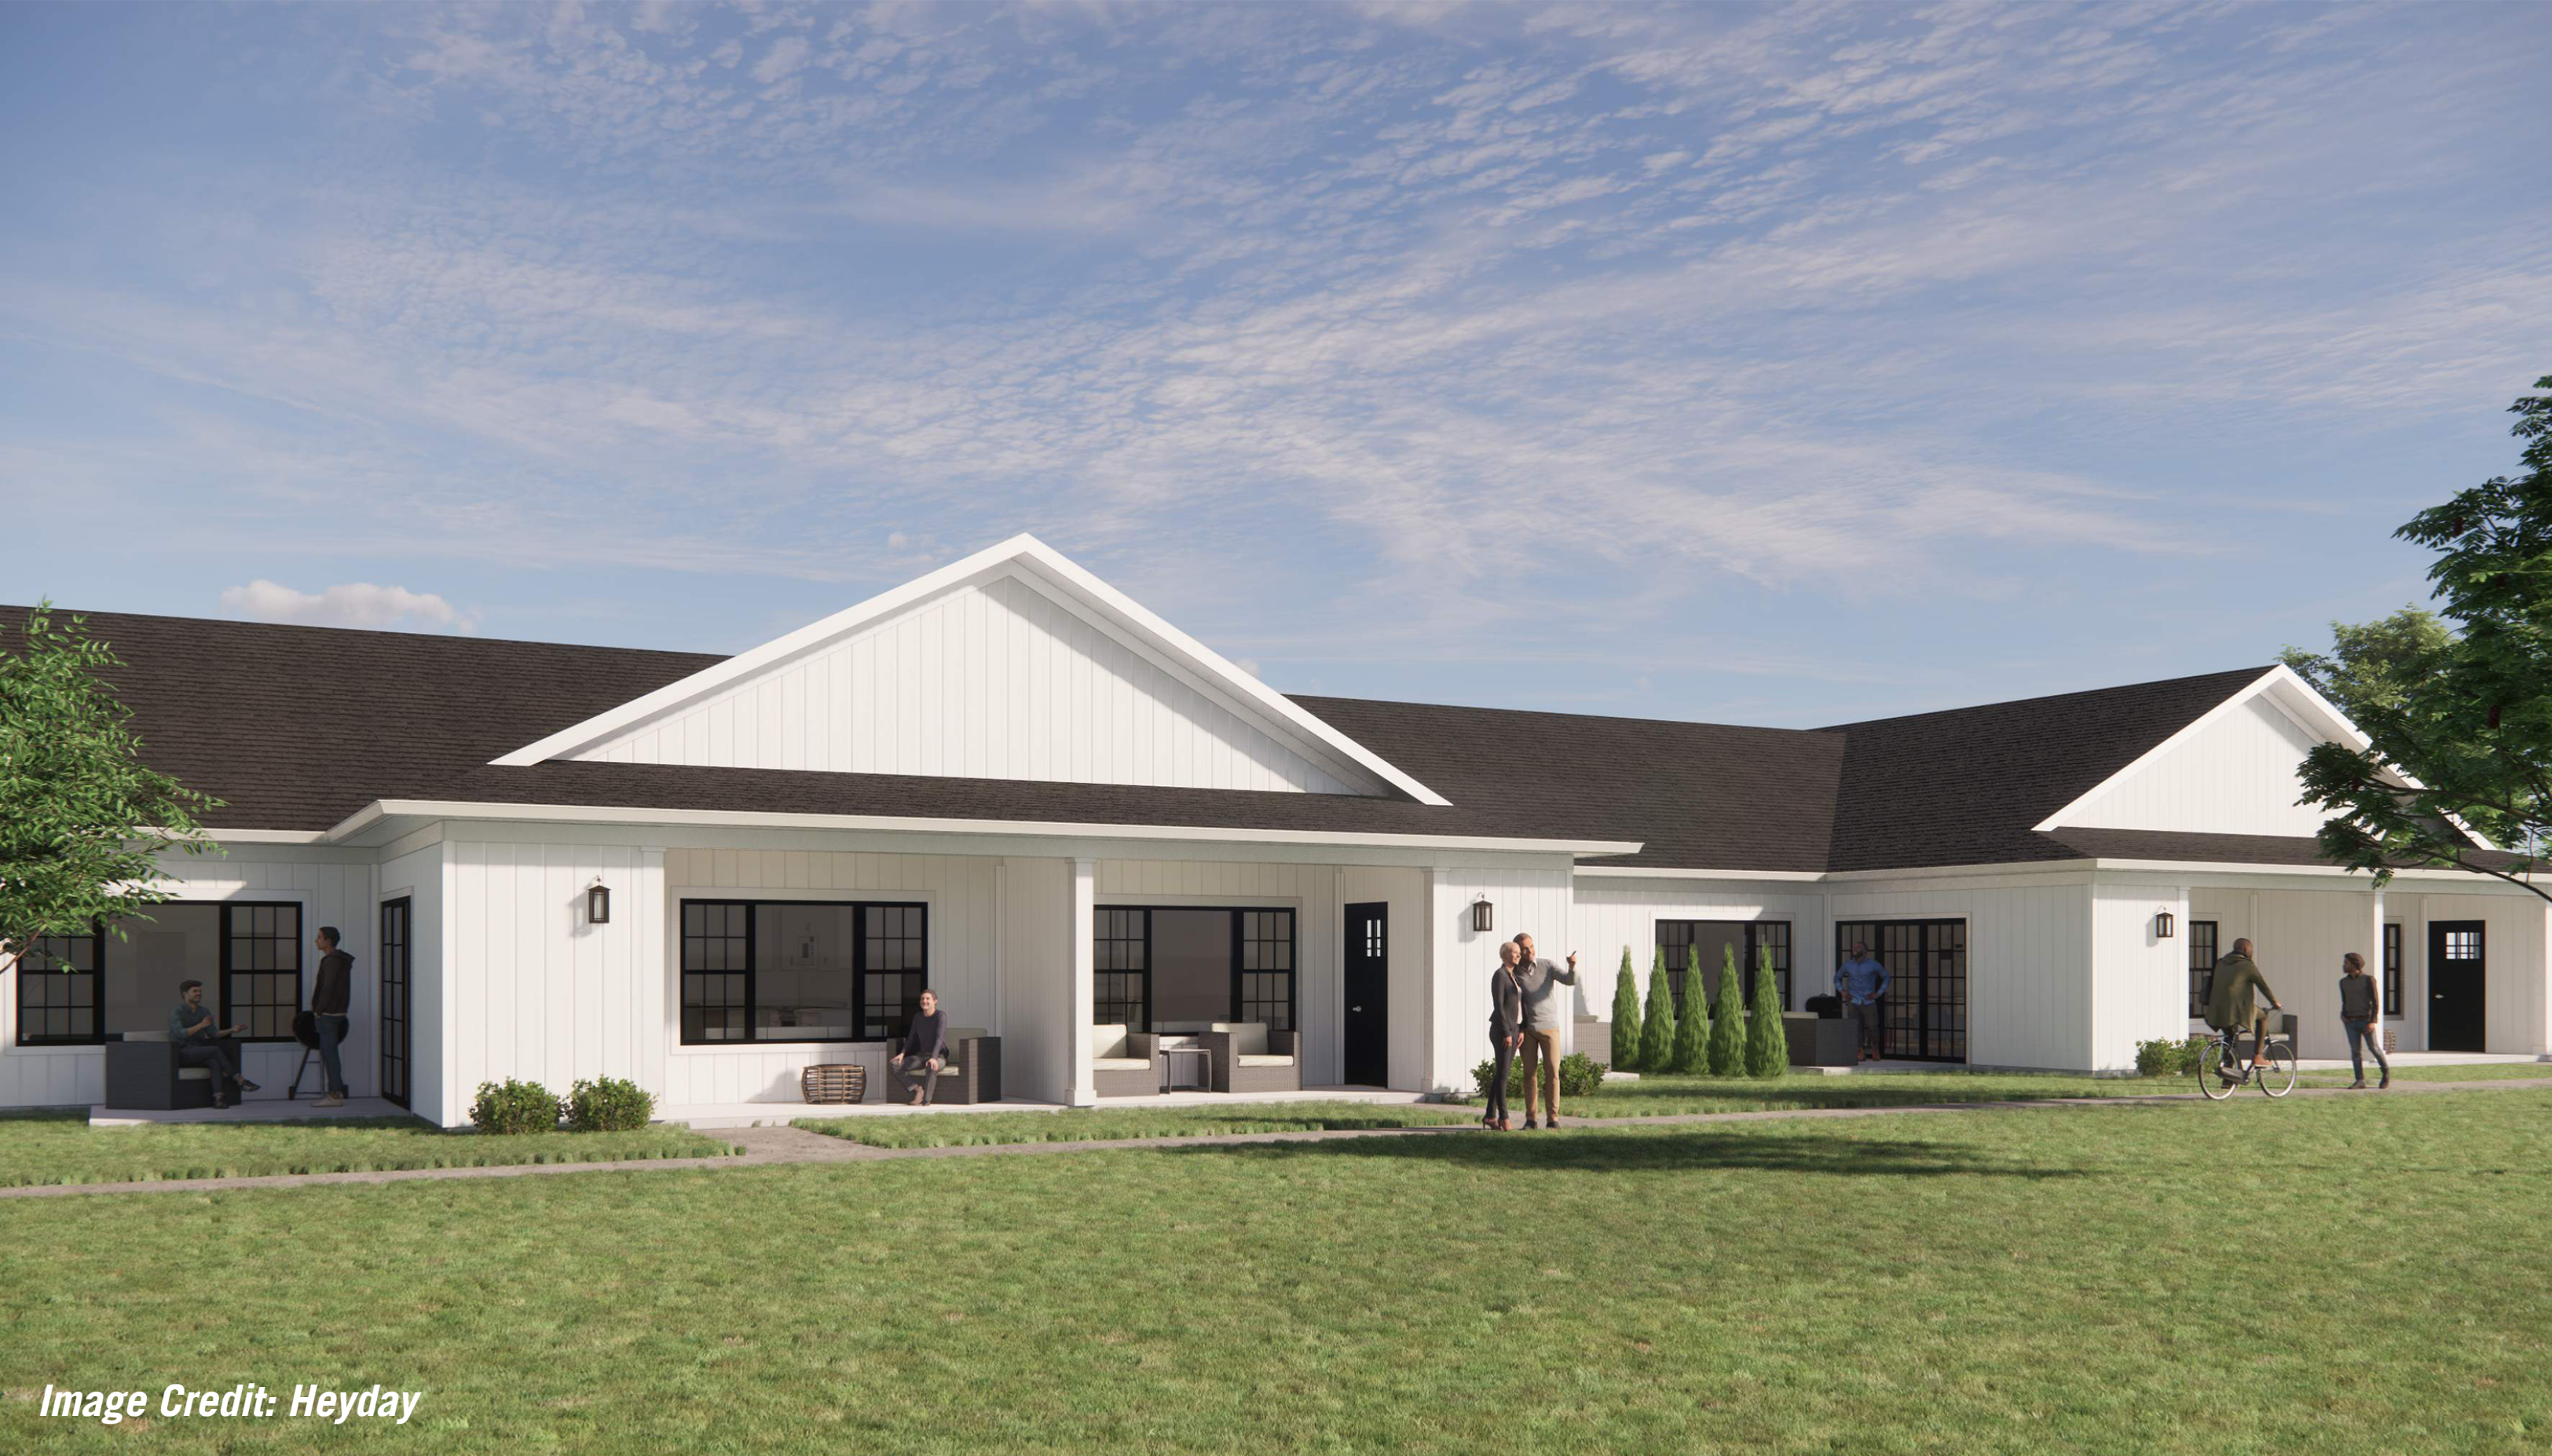 Rendering of a Hey Day home in Sun Prairie, Wisconsin.